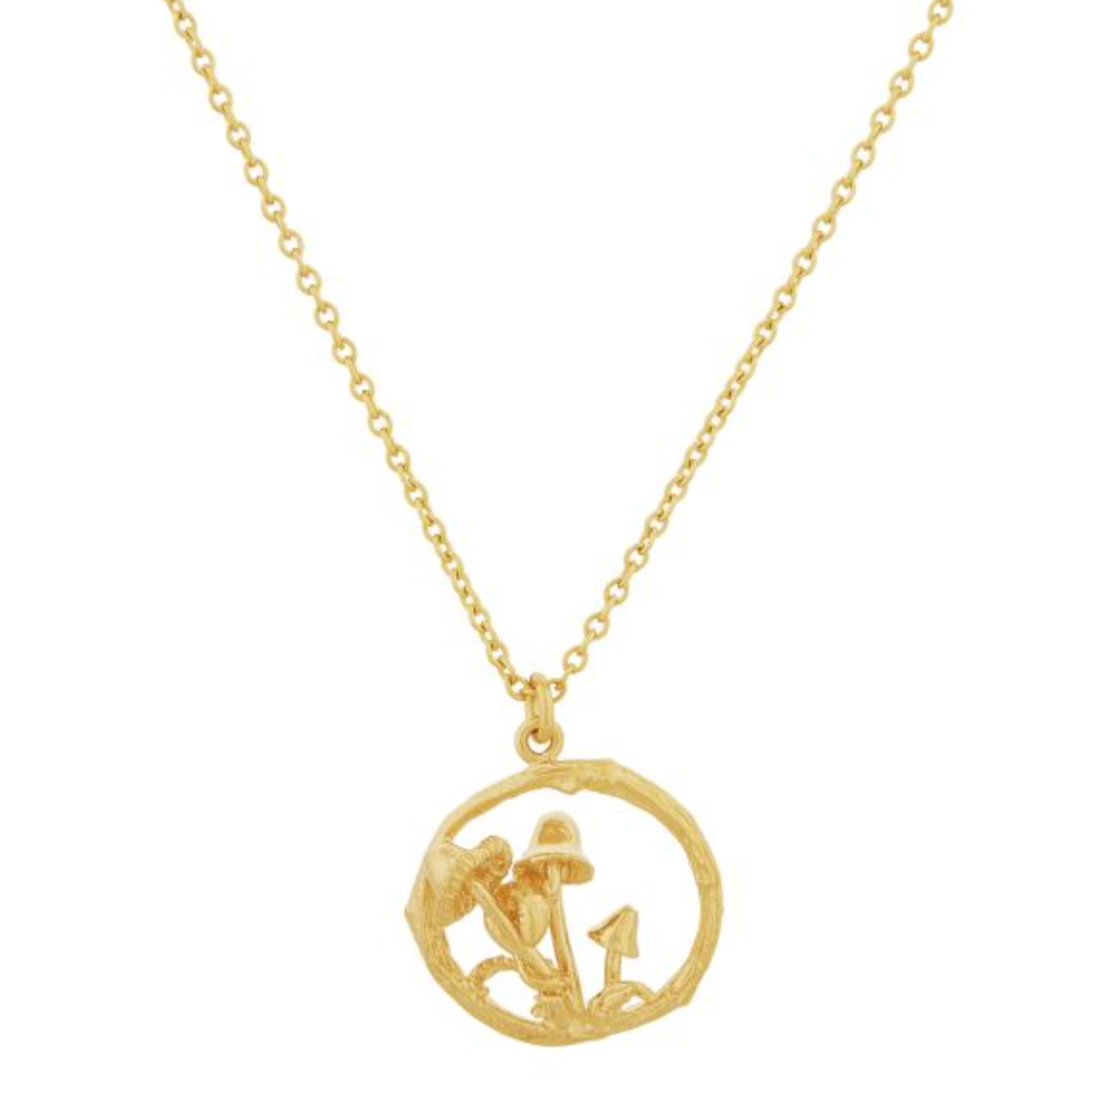 a gold open circle pendant necklace with a cluster of mushrooms on a white background